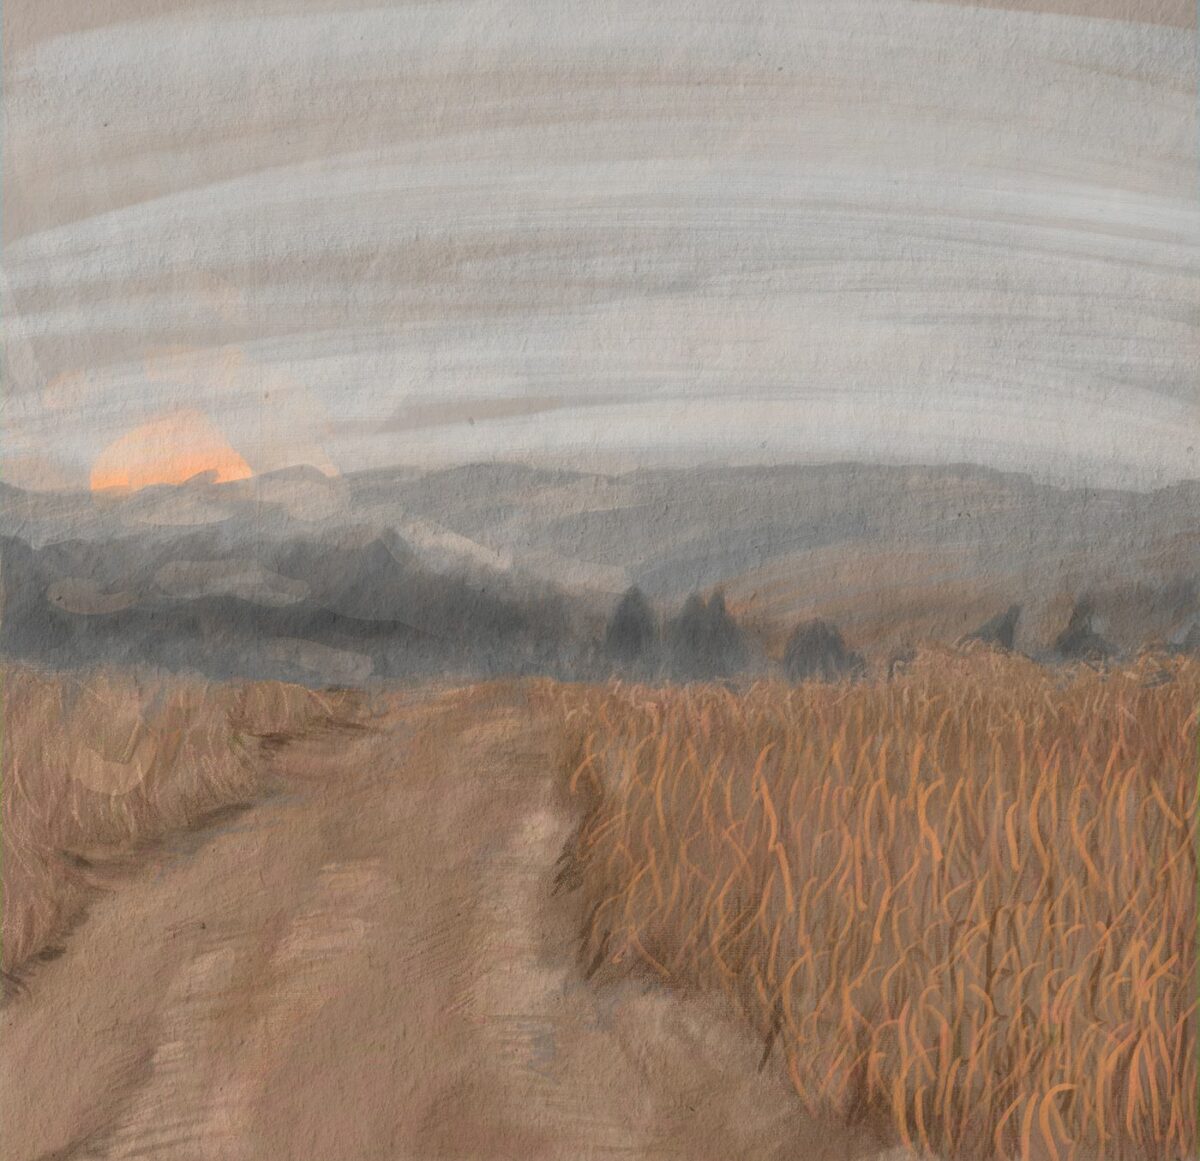 A Walk Through The Fields A Marvelous Digital Painting Series By Veronika Stehr 7